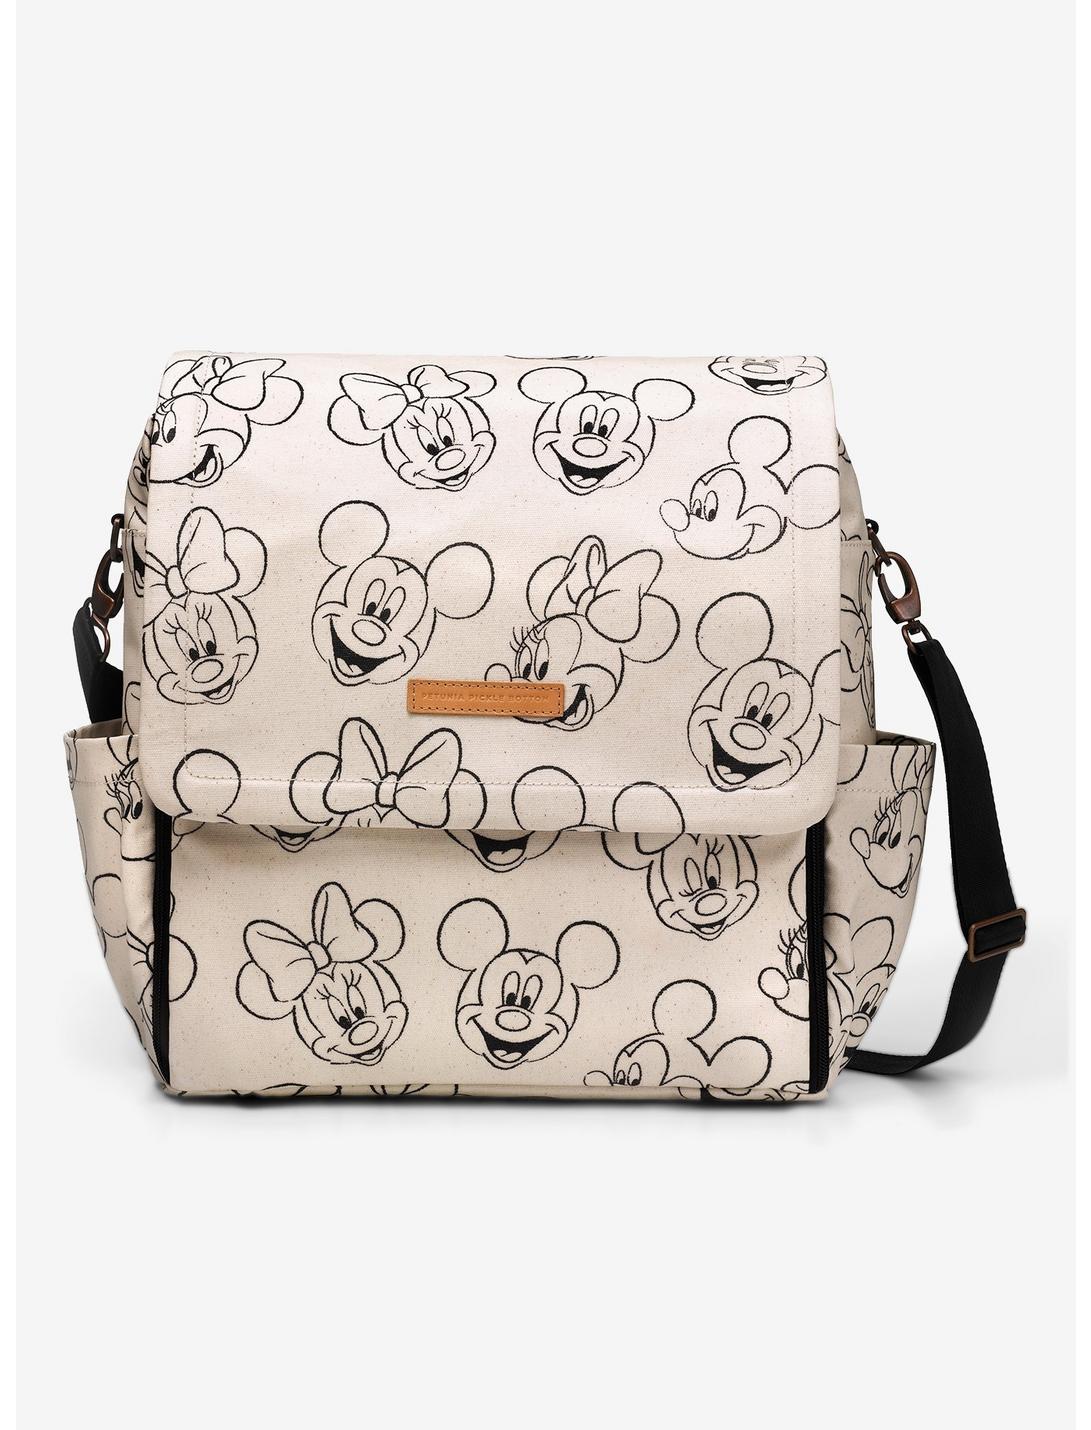 Petunia Pickle Bottom Disney Minnie And Mickey Mouse Sketch Boxy Backpack, , hi-res